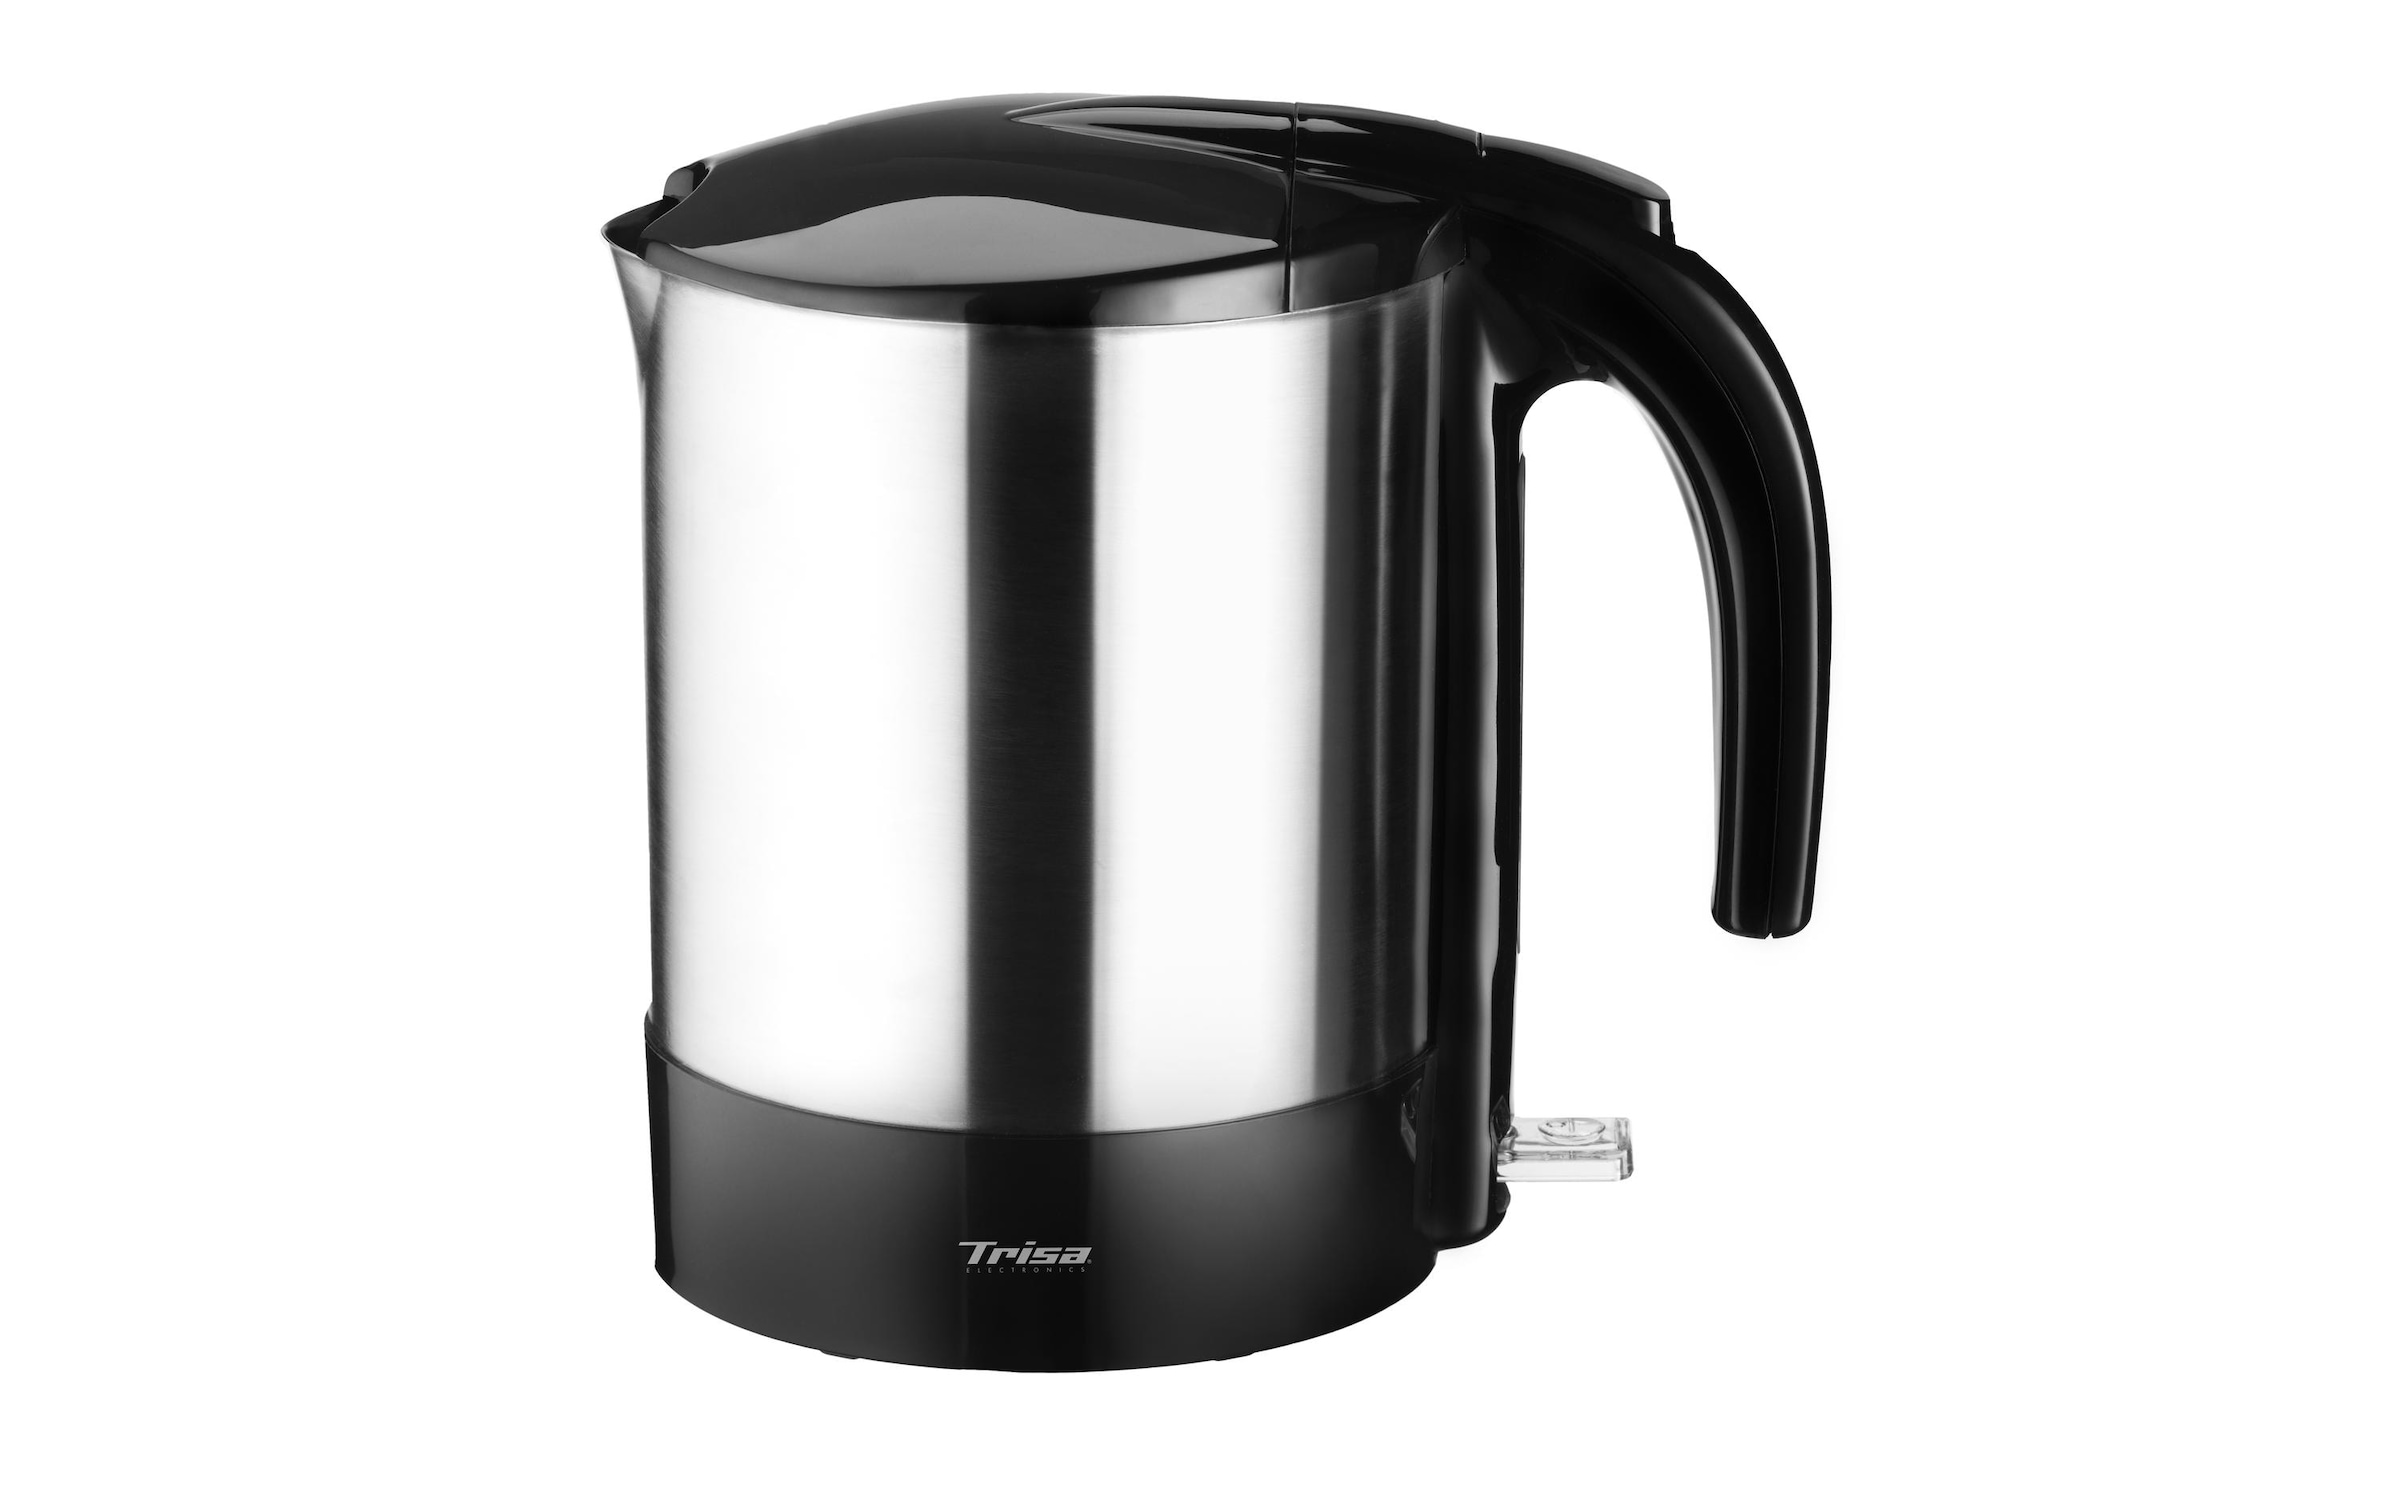 Buy Princess 236023 Kettle cordless Stainless steel